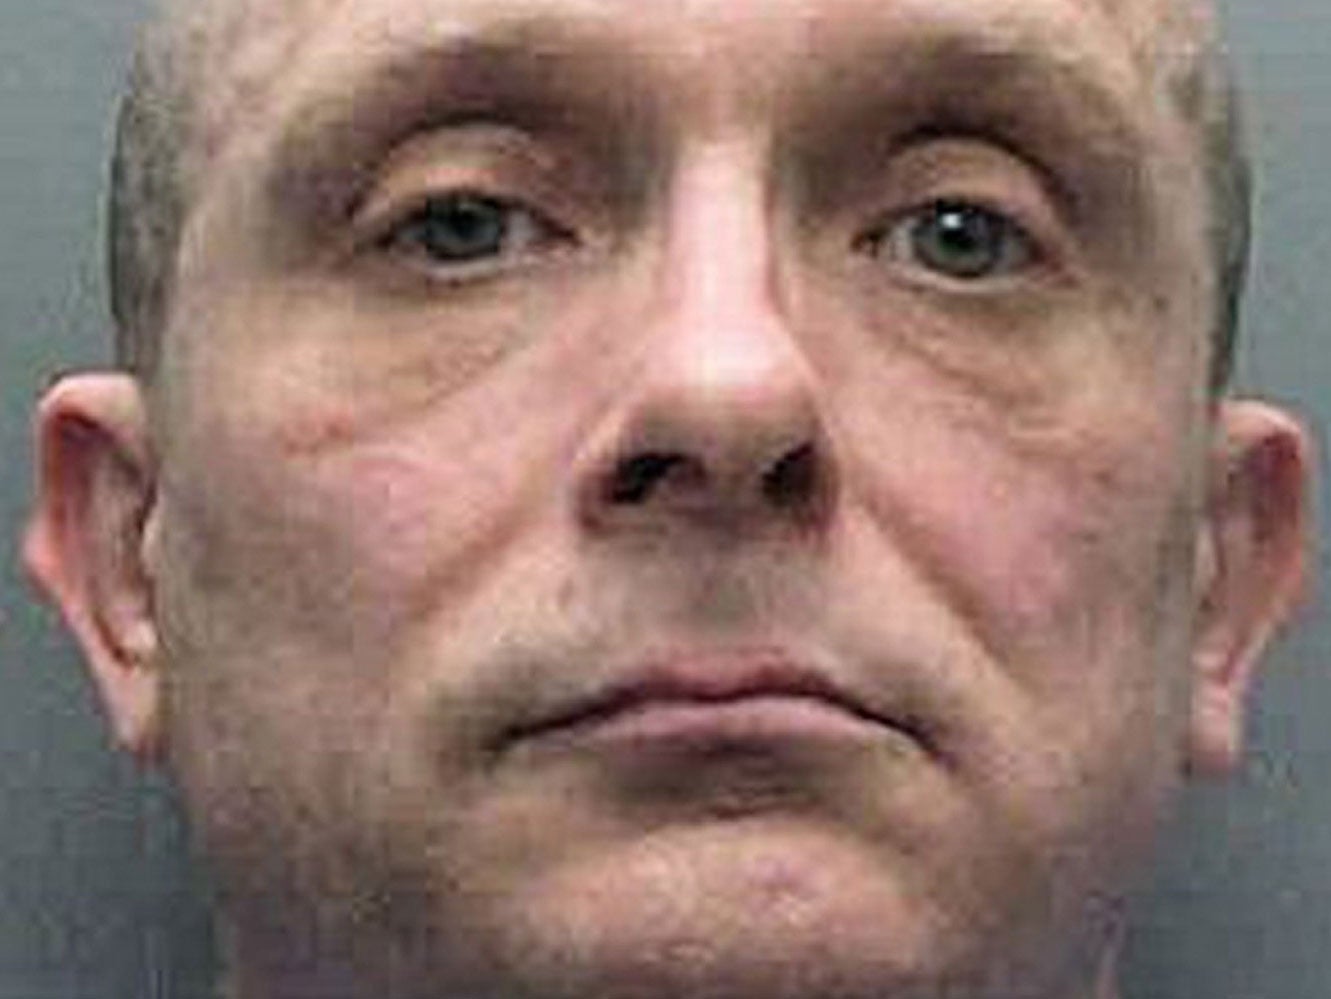 Russell Bishop, now a convicted sex offender, is being retried in connection with the murder of Karen Hadaway and Nicola Fellows in 1986